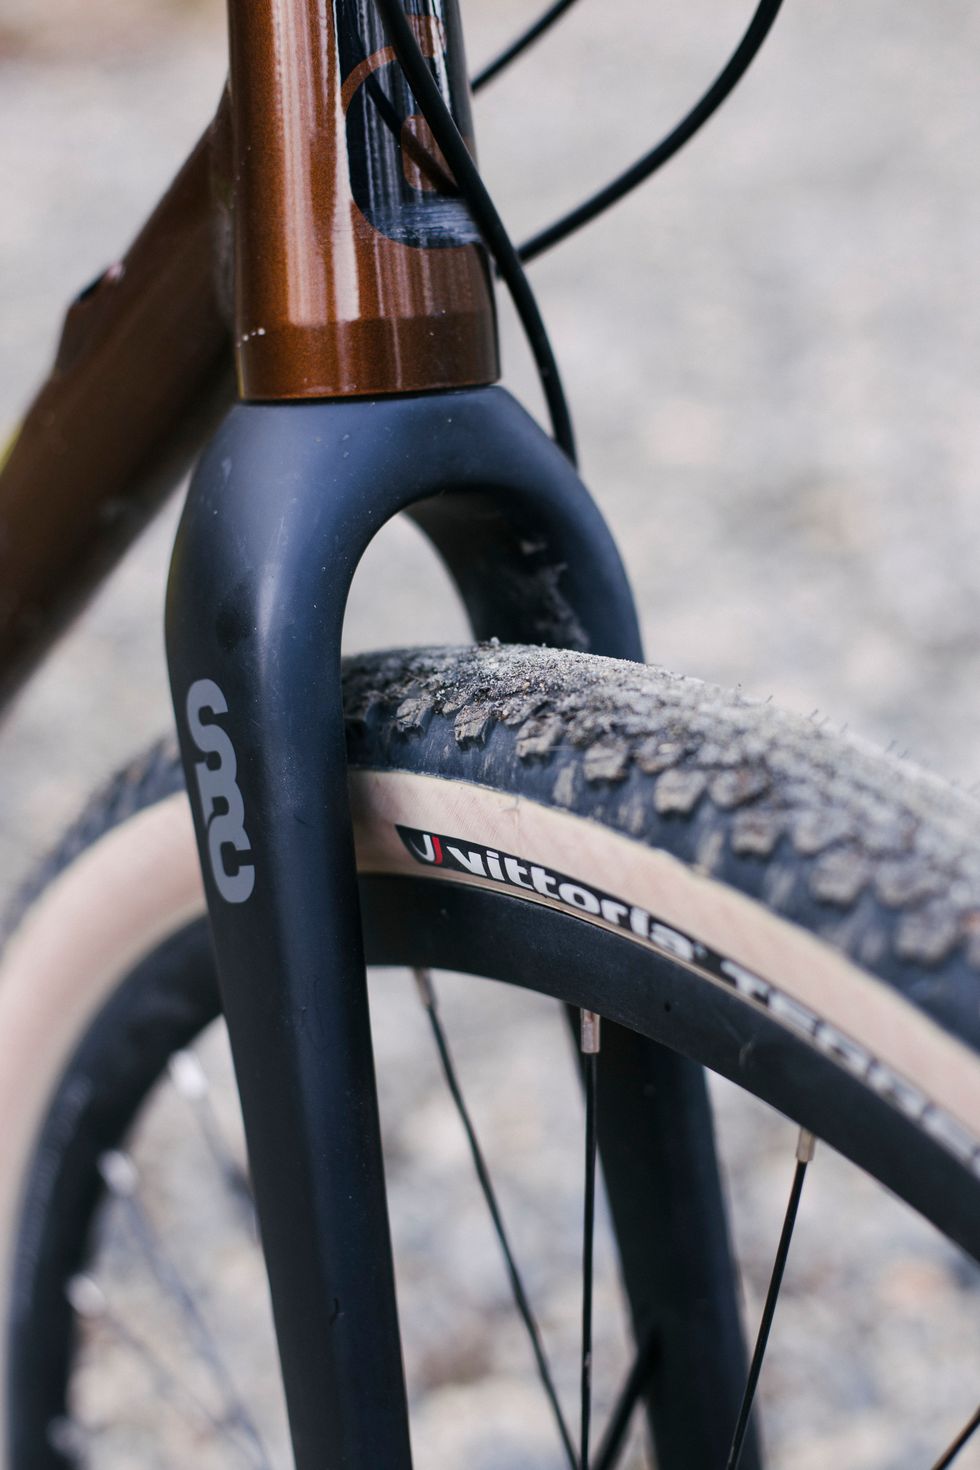 State All-Road Suspension Fork 